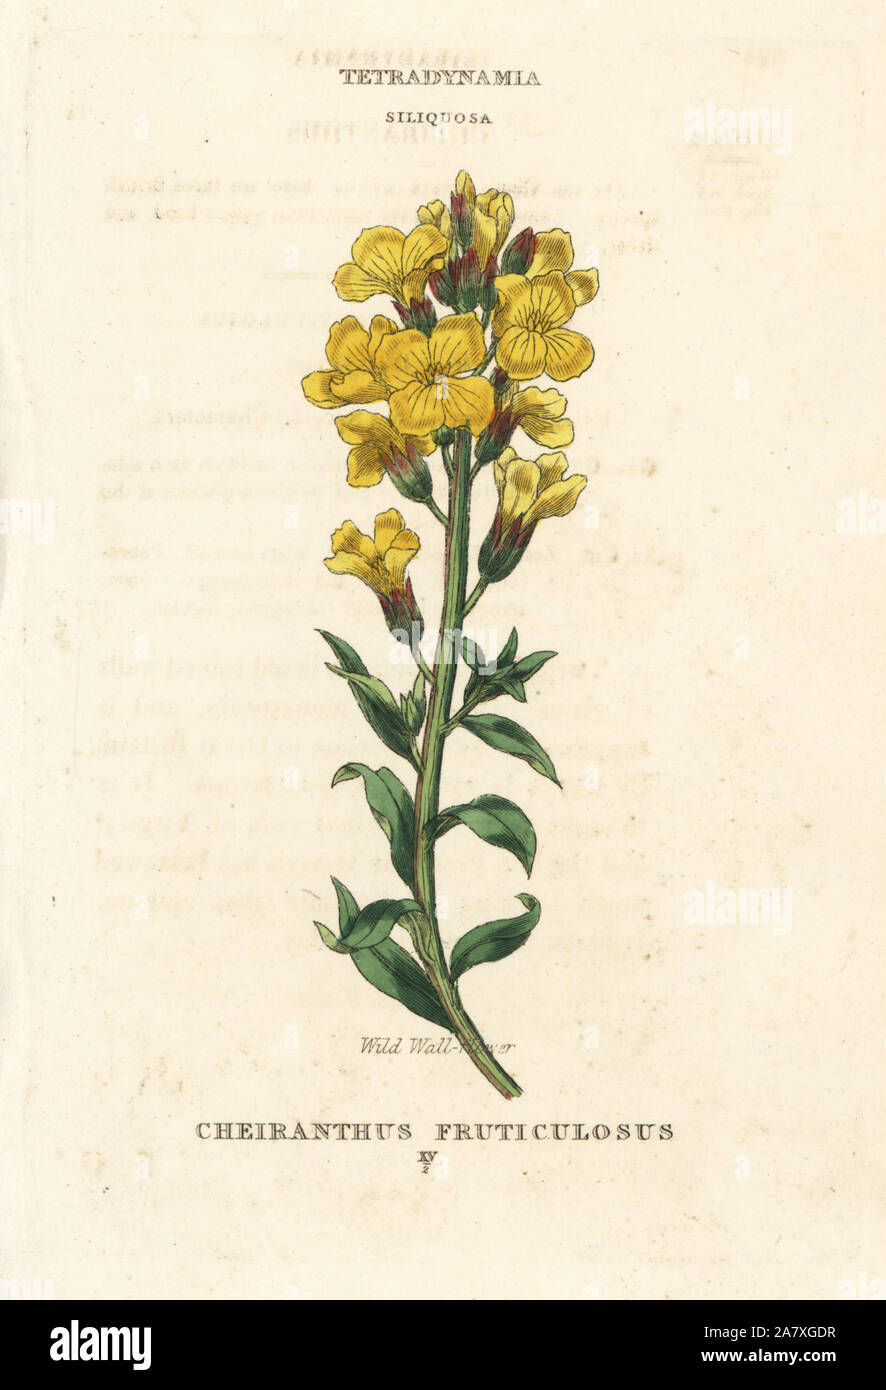 Wild wallflower, Matthiola fruticulosa  (Cheiranthus fruticulosus). Handcoloured copperplate engraving after an illustration by Richard Duppa from his The Classes and Orders of the Linnaean System of Botany, Longman, Hurst, London, 1816. Stock Photo